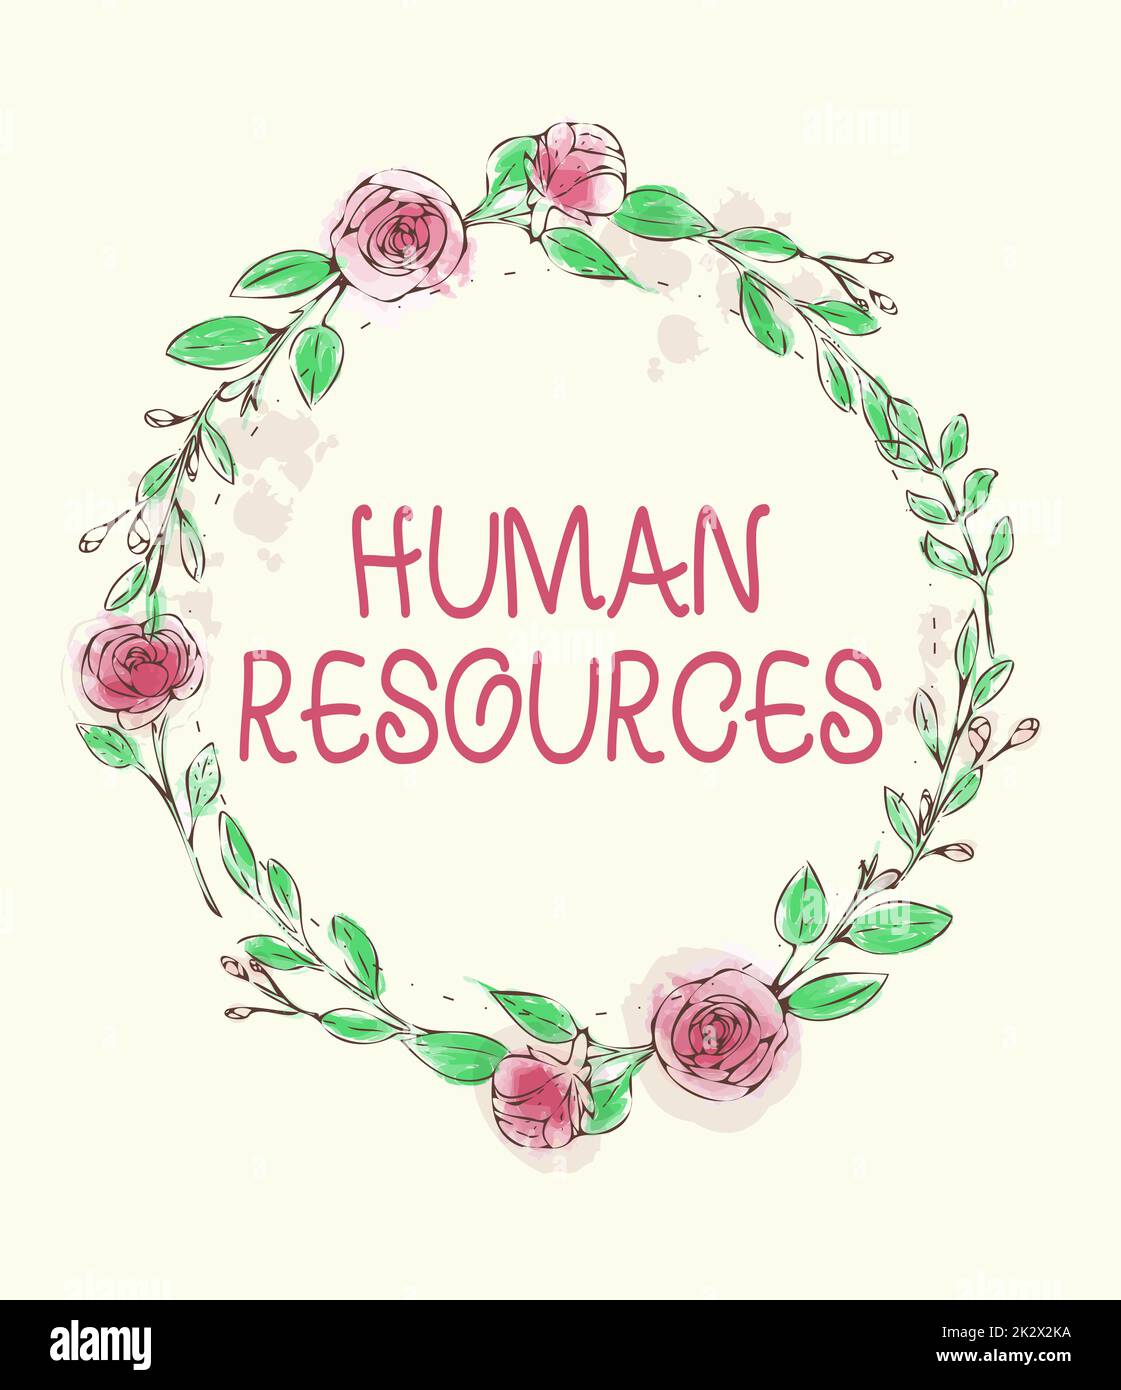 Text caption presenting Human Resources. Business concept The showing who make up the workforce of an organization Blank Frame Decorated With Abstract Modernized Forms Flowers And Foliage. Stock Photo